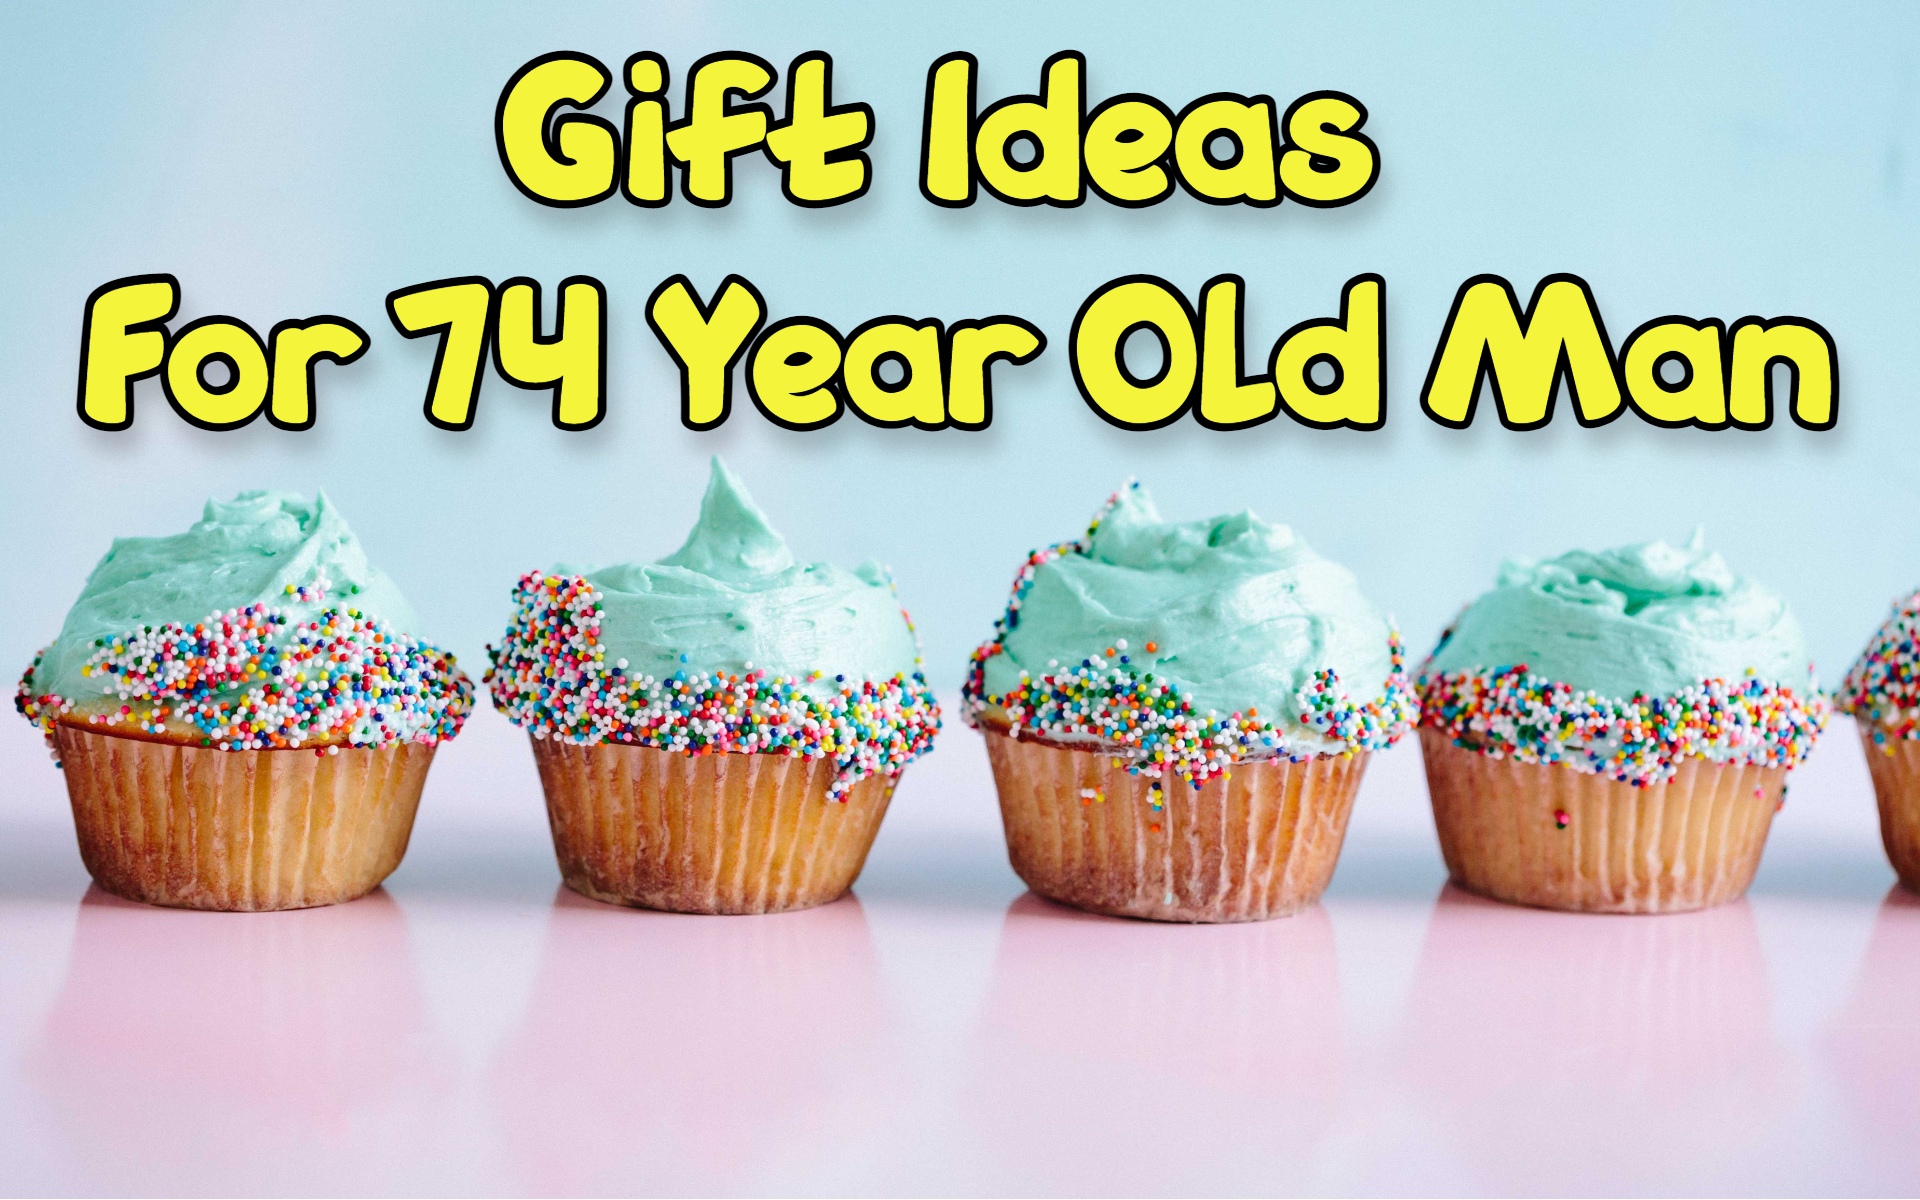 Cover image of gift ideas for 74-year-old man by Giftsedge